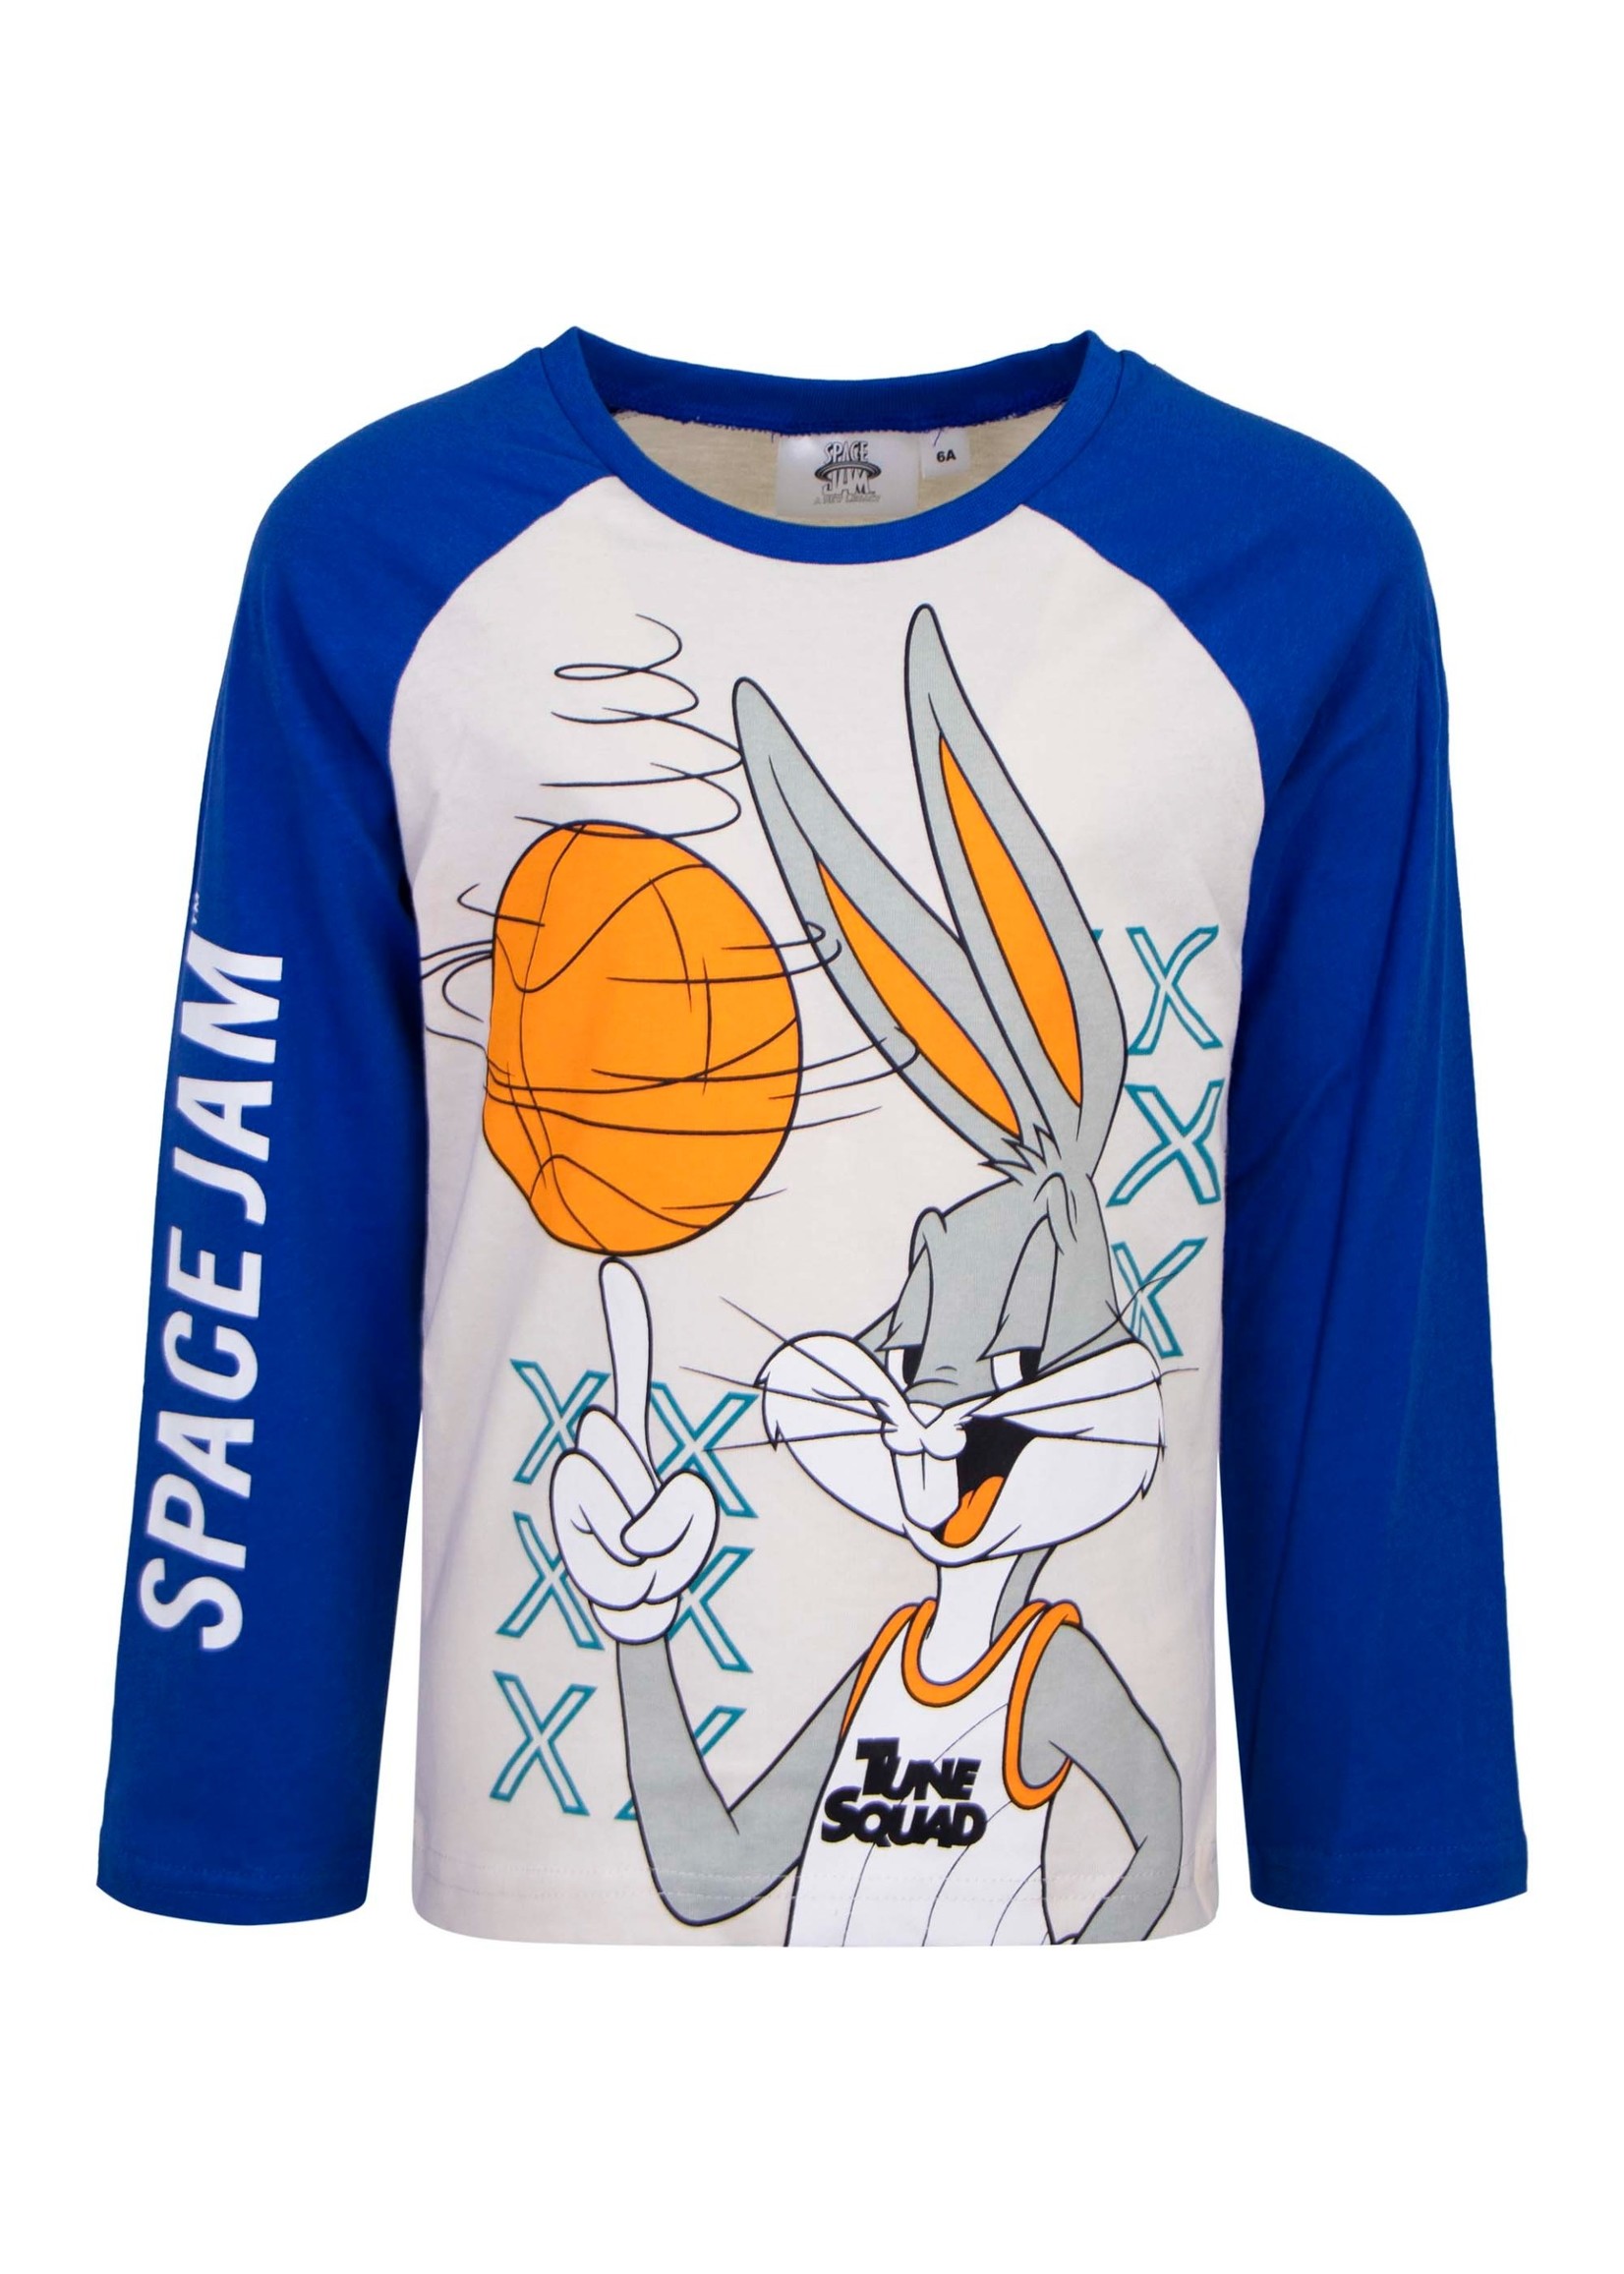 SPACE JAM Bugs Bunny long sleeve from Space Jam beige